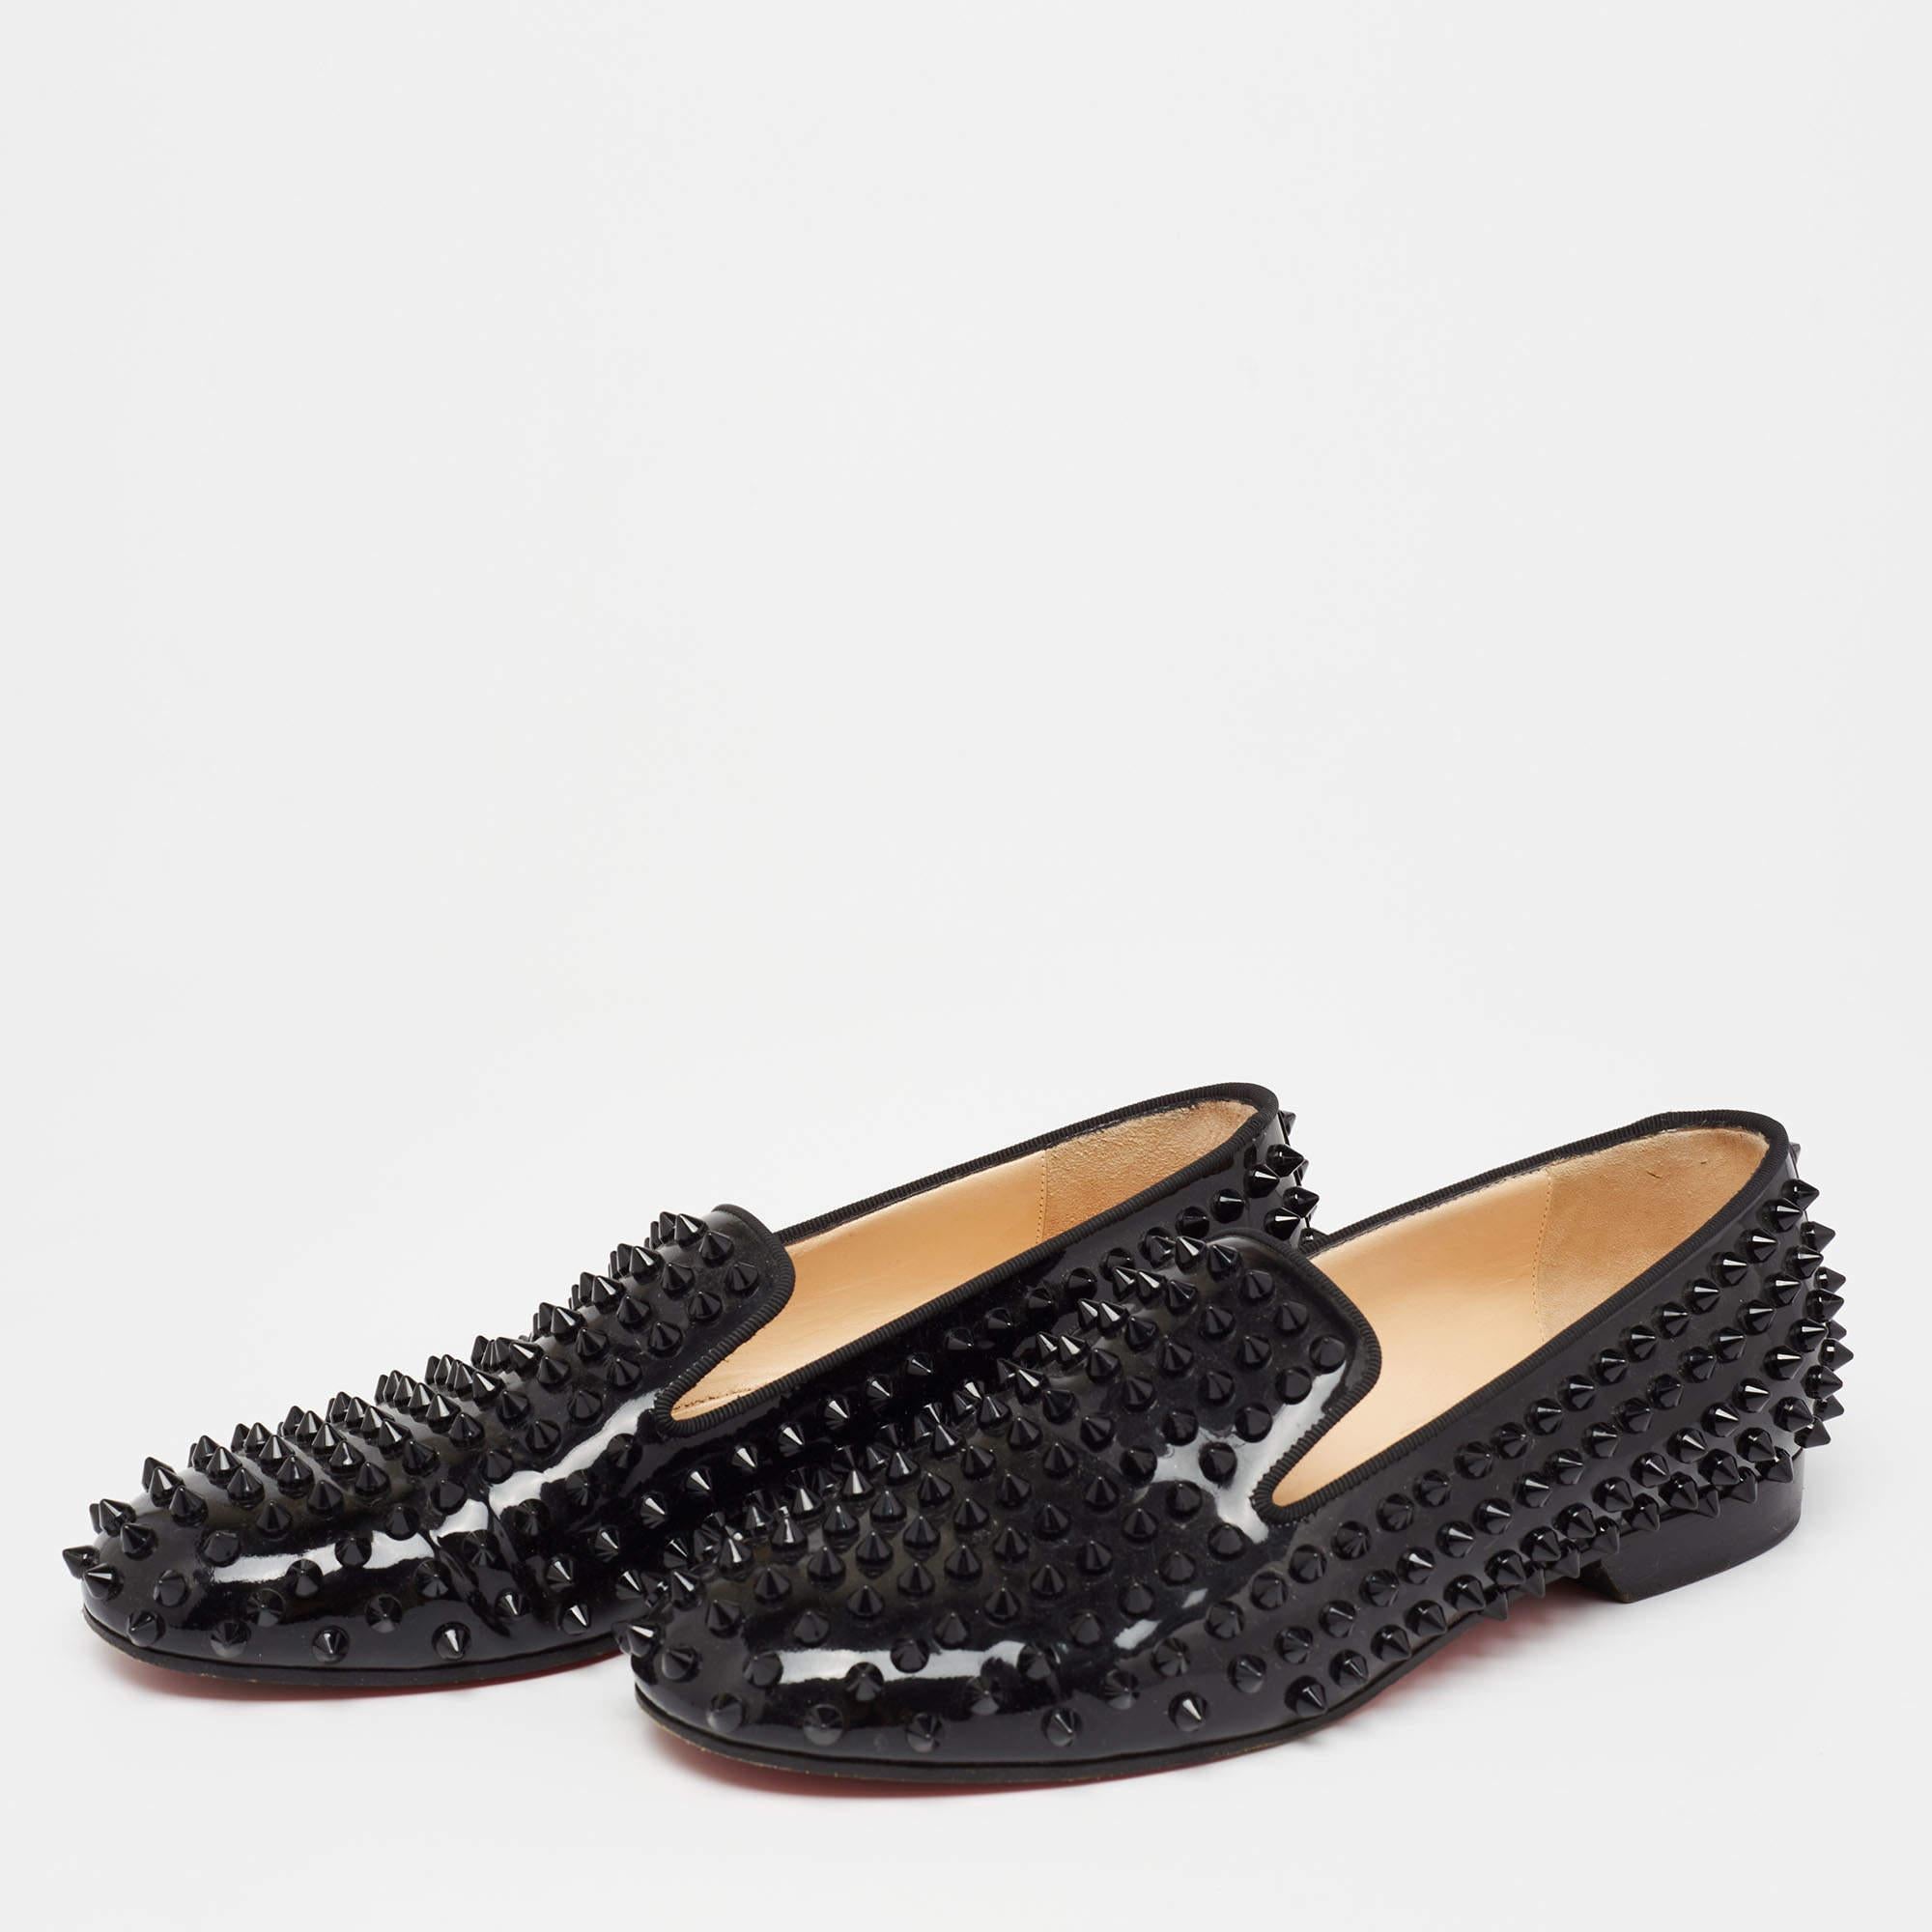 Crafted from black patent leather, these smoking slippers from Christian Louboutin simply stand out! They feature a round-toe silhouette with the signature spike embellishments adorning the exterior. They are complete with comfortable leather-lined